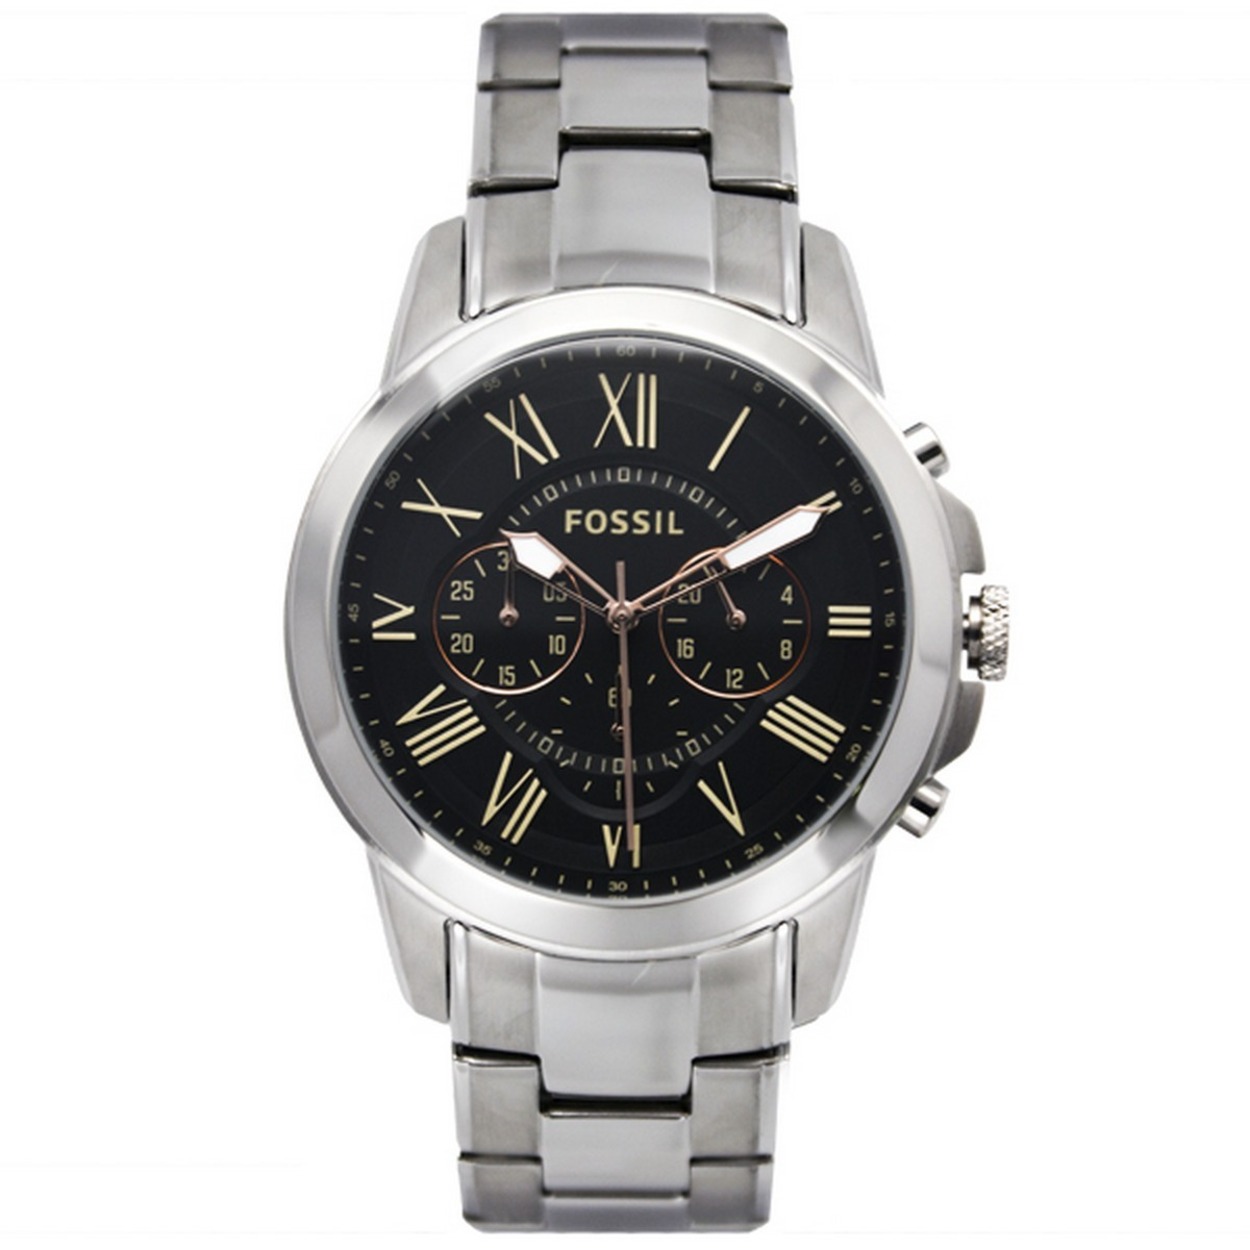 Fossil Stainless Steel Watch. 